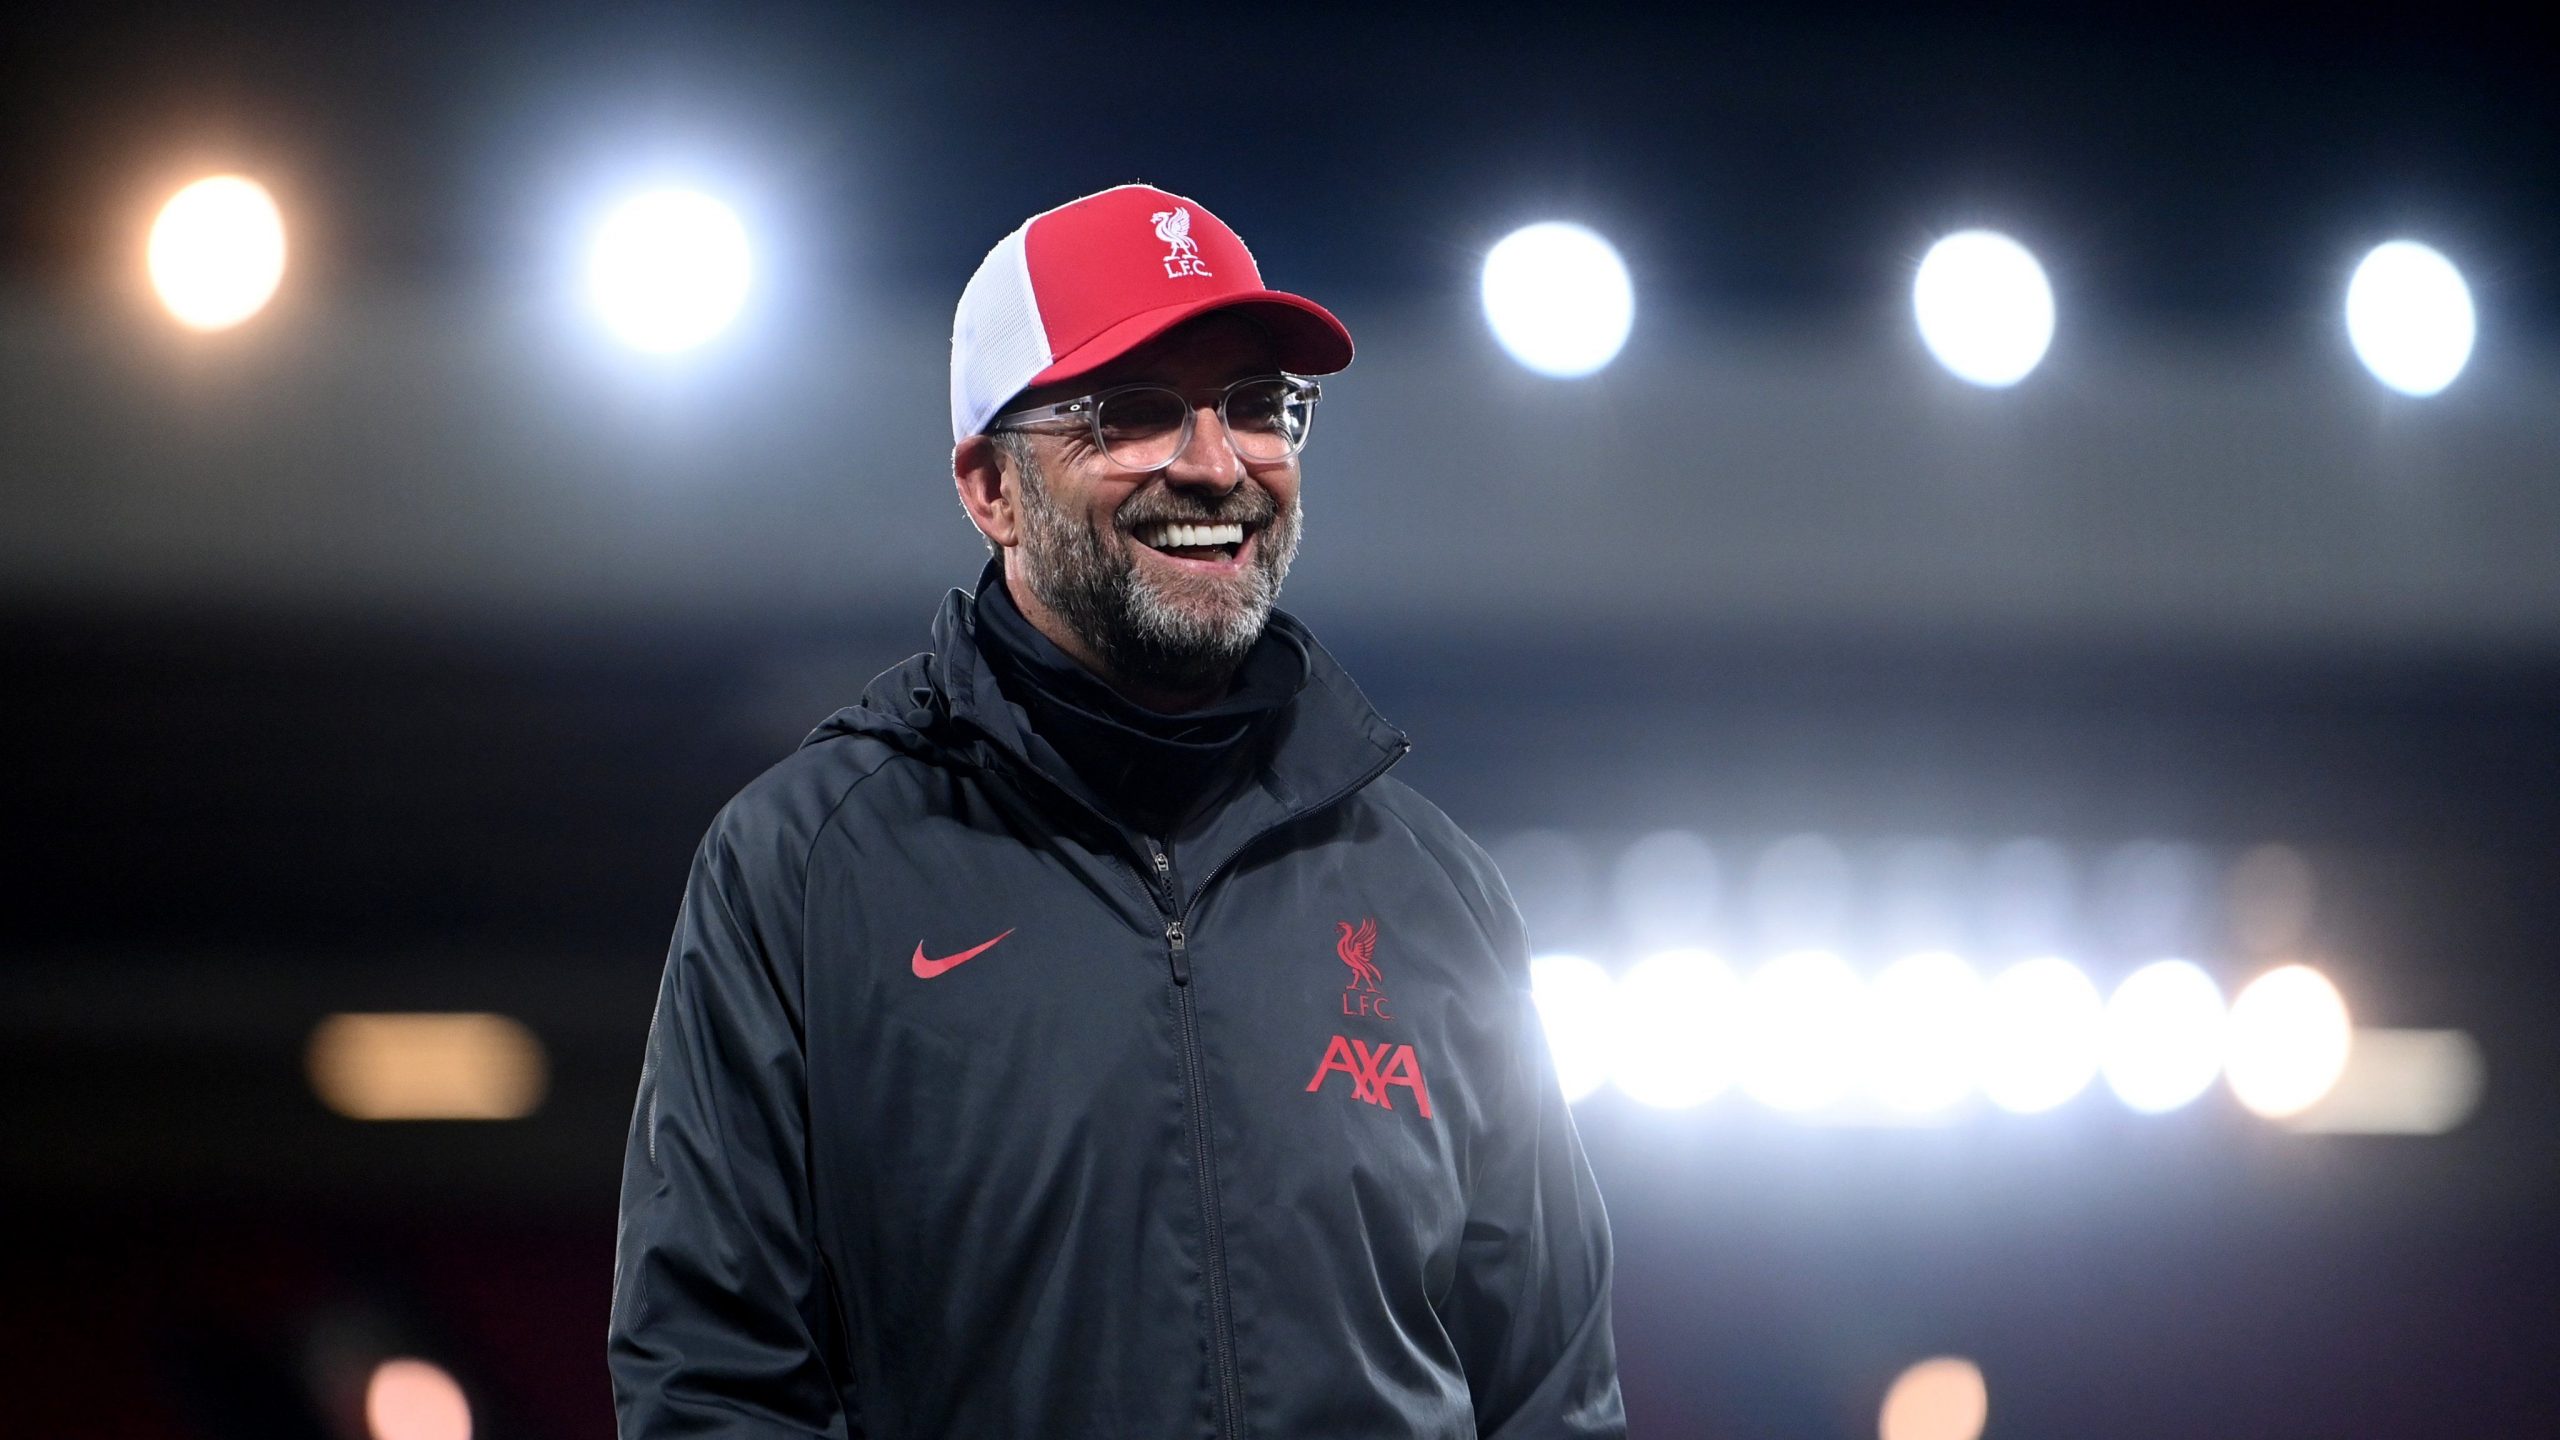 ‘Did he say that it was sloppy?’: Liverpool coach Jurgen Klopp hits back at Roy Keane